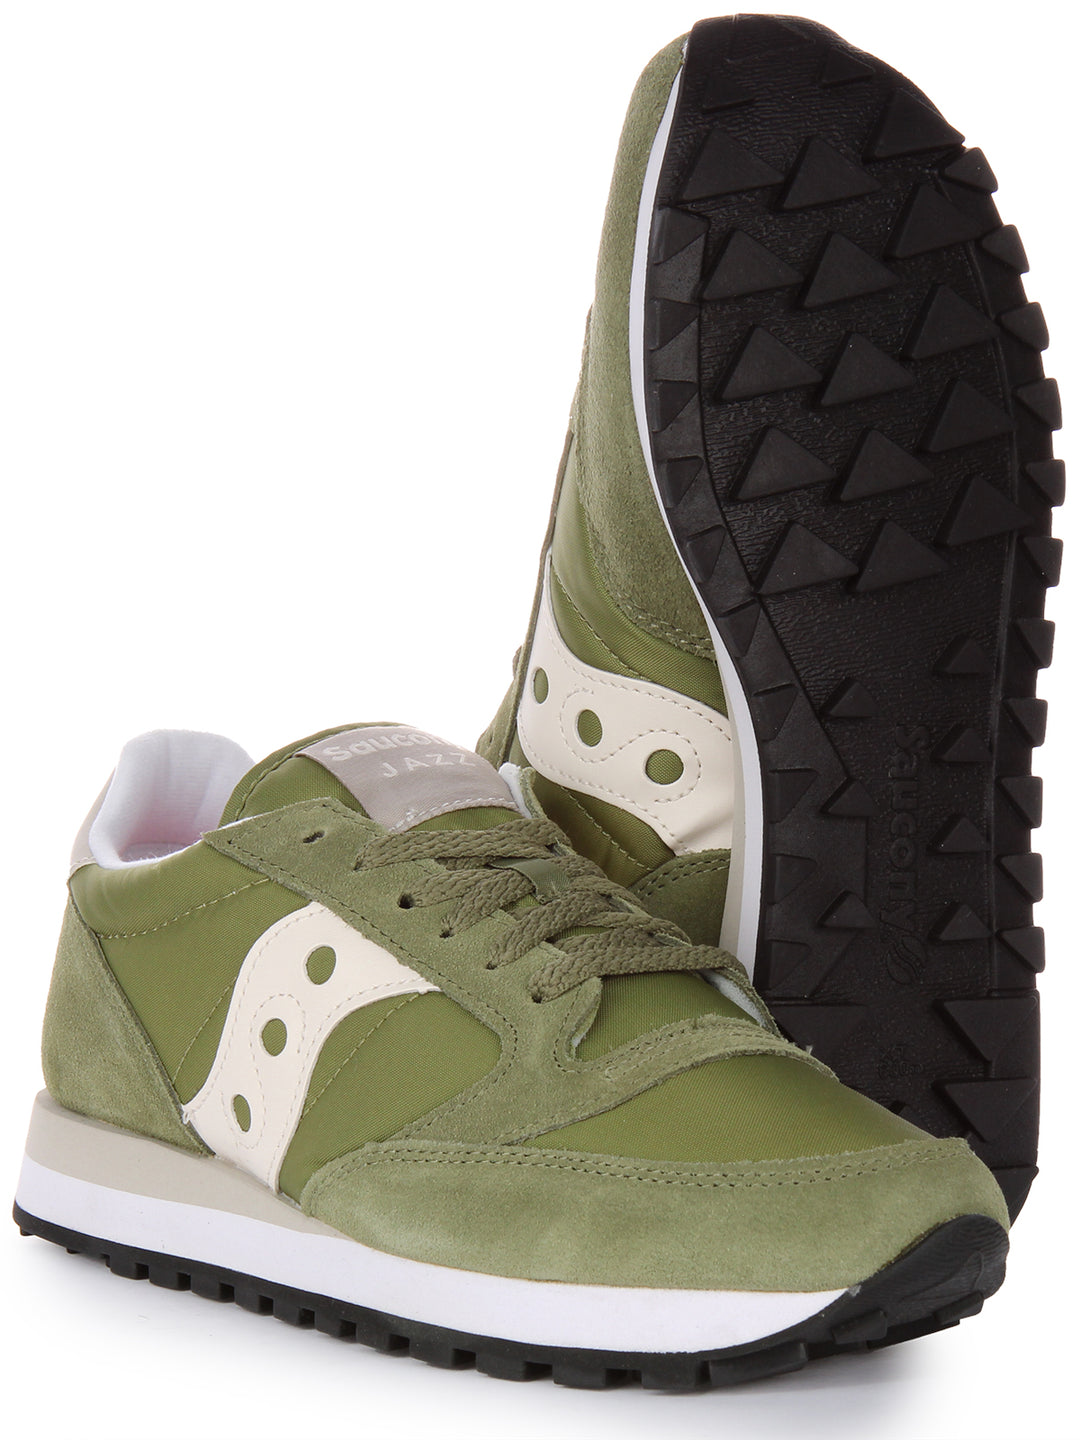 Saucony Jazz Original In Olive White For Women